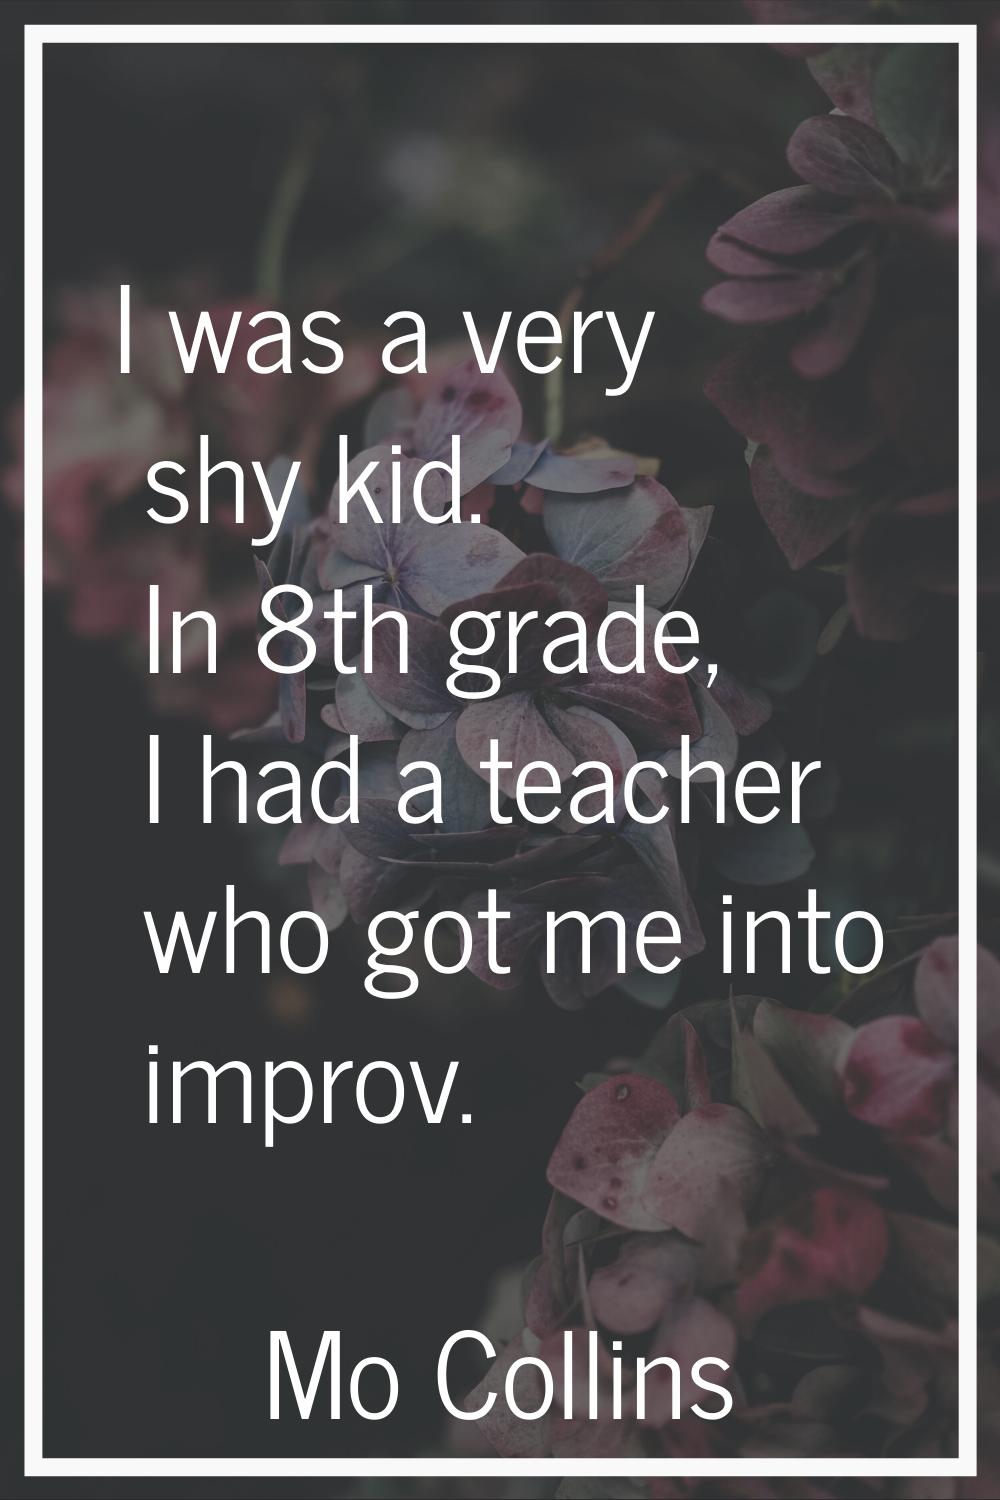 I was a very shy kid. In 8th grade, I had a teacher who got me into improv.